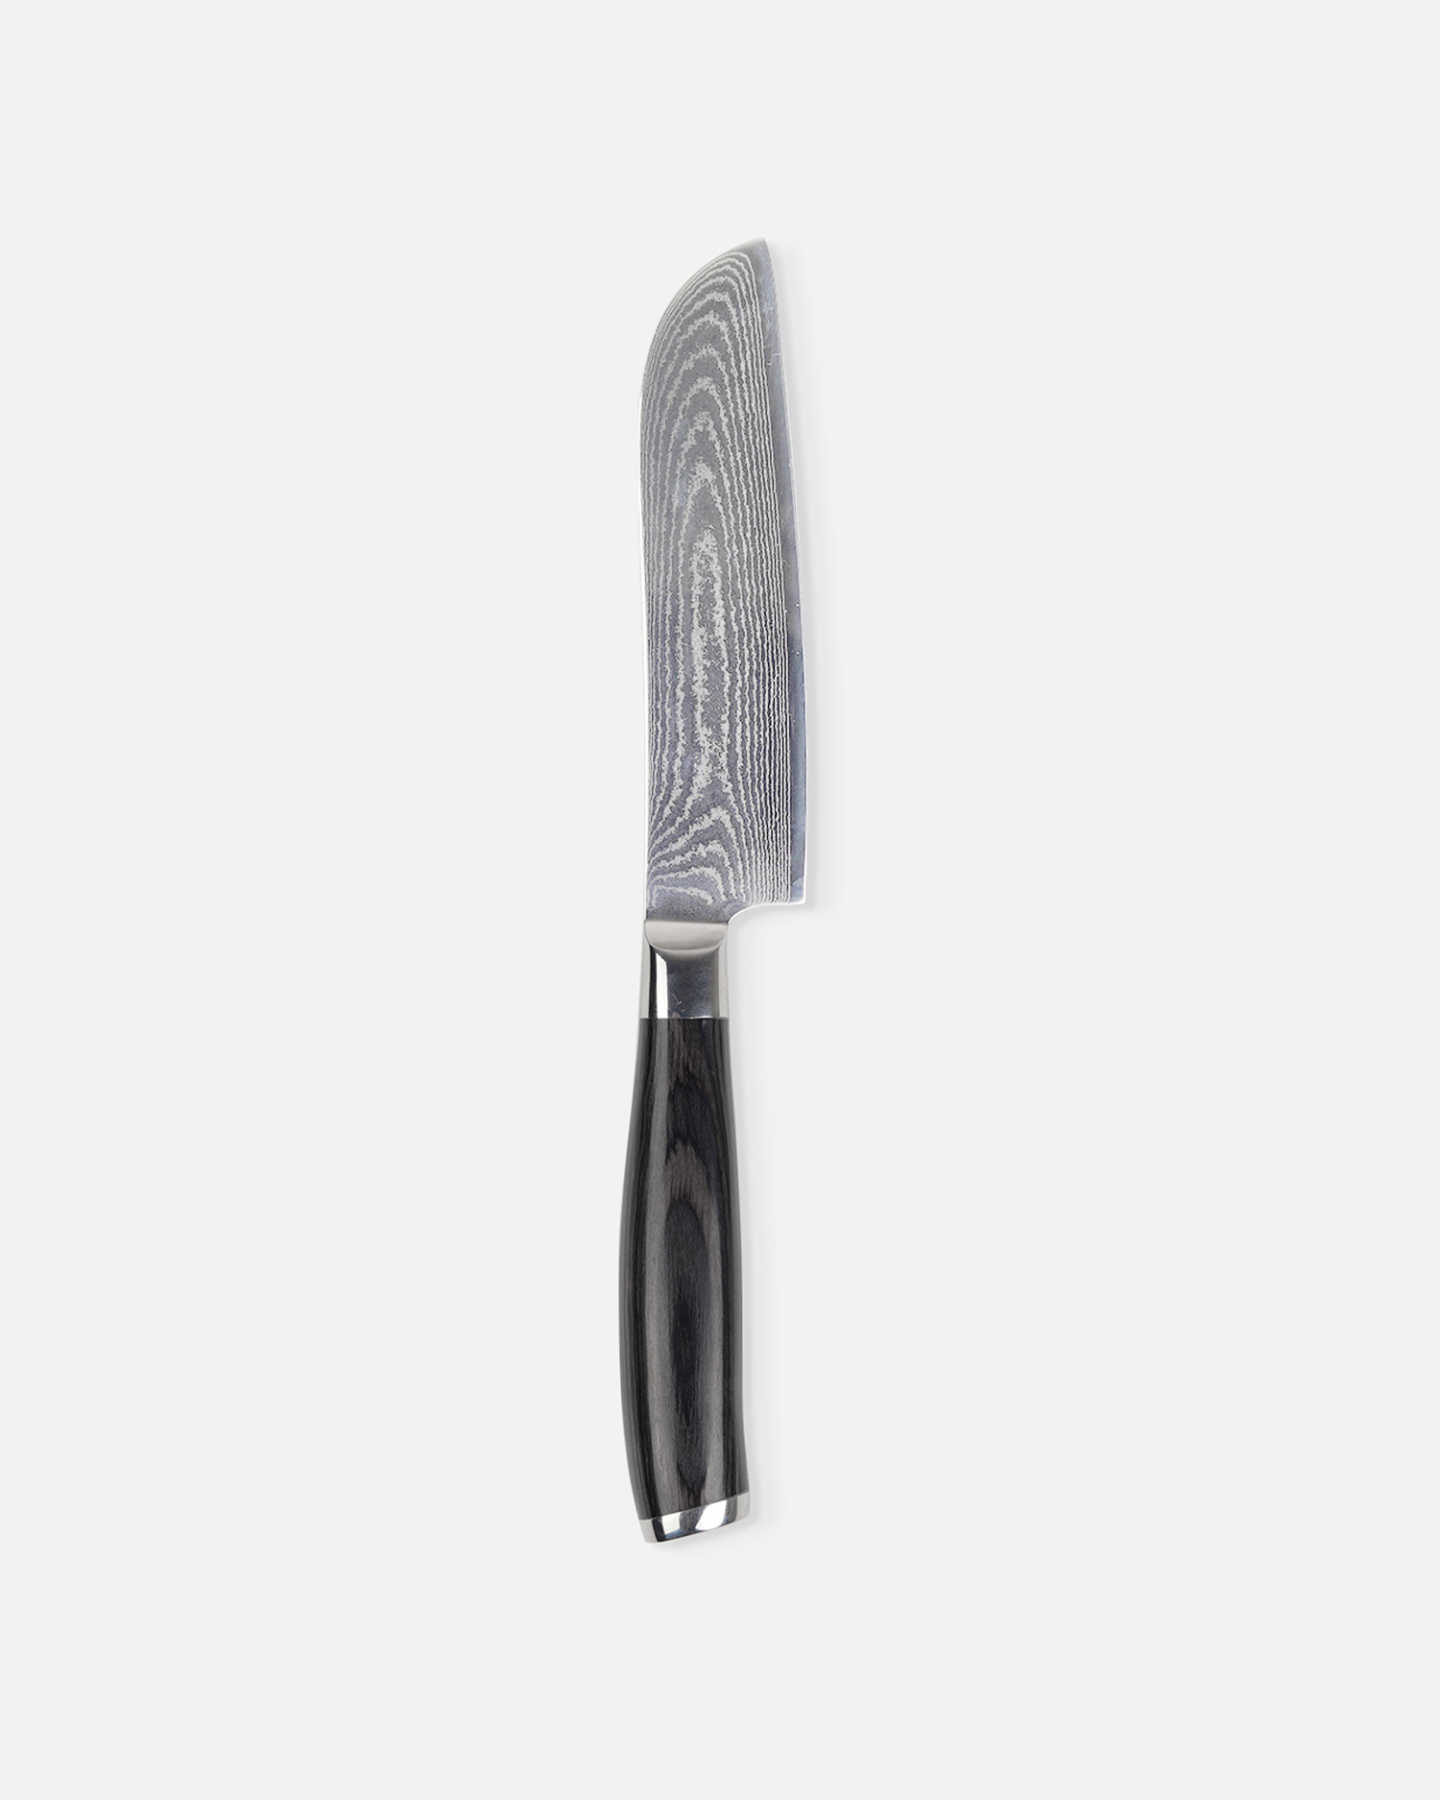 Japanese Damascus Steel Knife Collection - Black